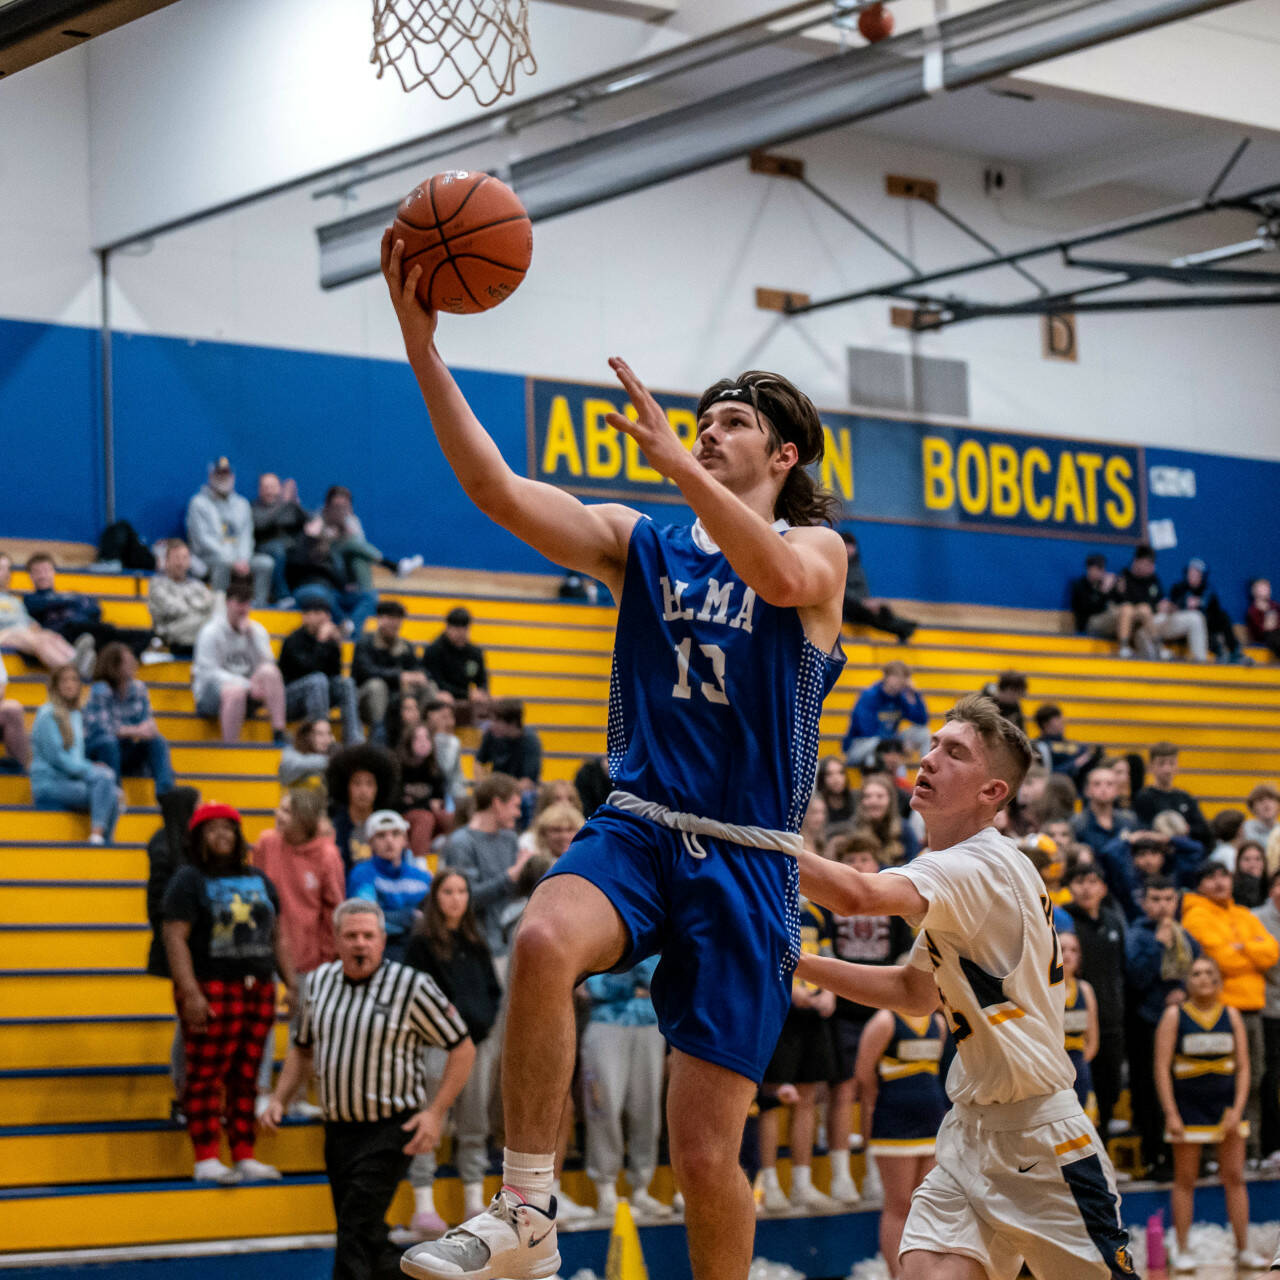 PHOTO BY FOREST WORGUM 
Elma senior Gibson Cain (13) rises to score two of his team-high 23 points in the Eagles’ 71-49 win over Aberdeen on Monday at Sam Benn Gym in Aberdeen.